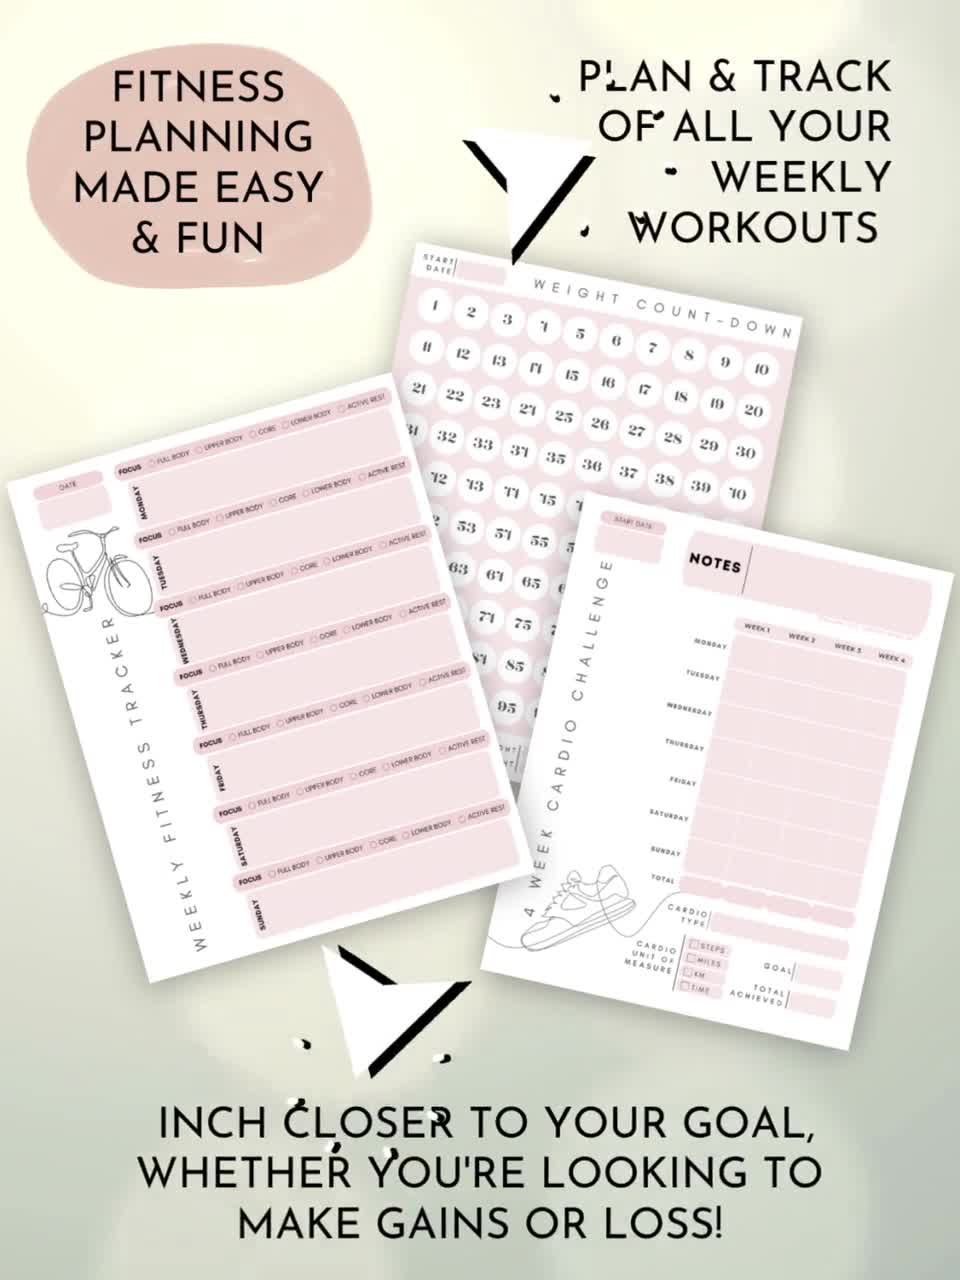 2024 Glow Up Planner: Self Care Planner, Fitness Journal, Skincare Routine,  Period Tracker, Workout Planner Digital Fitness Printable PDF -  France